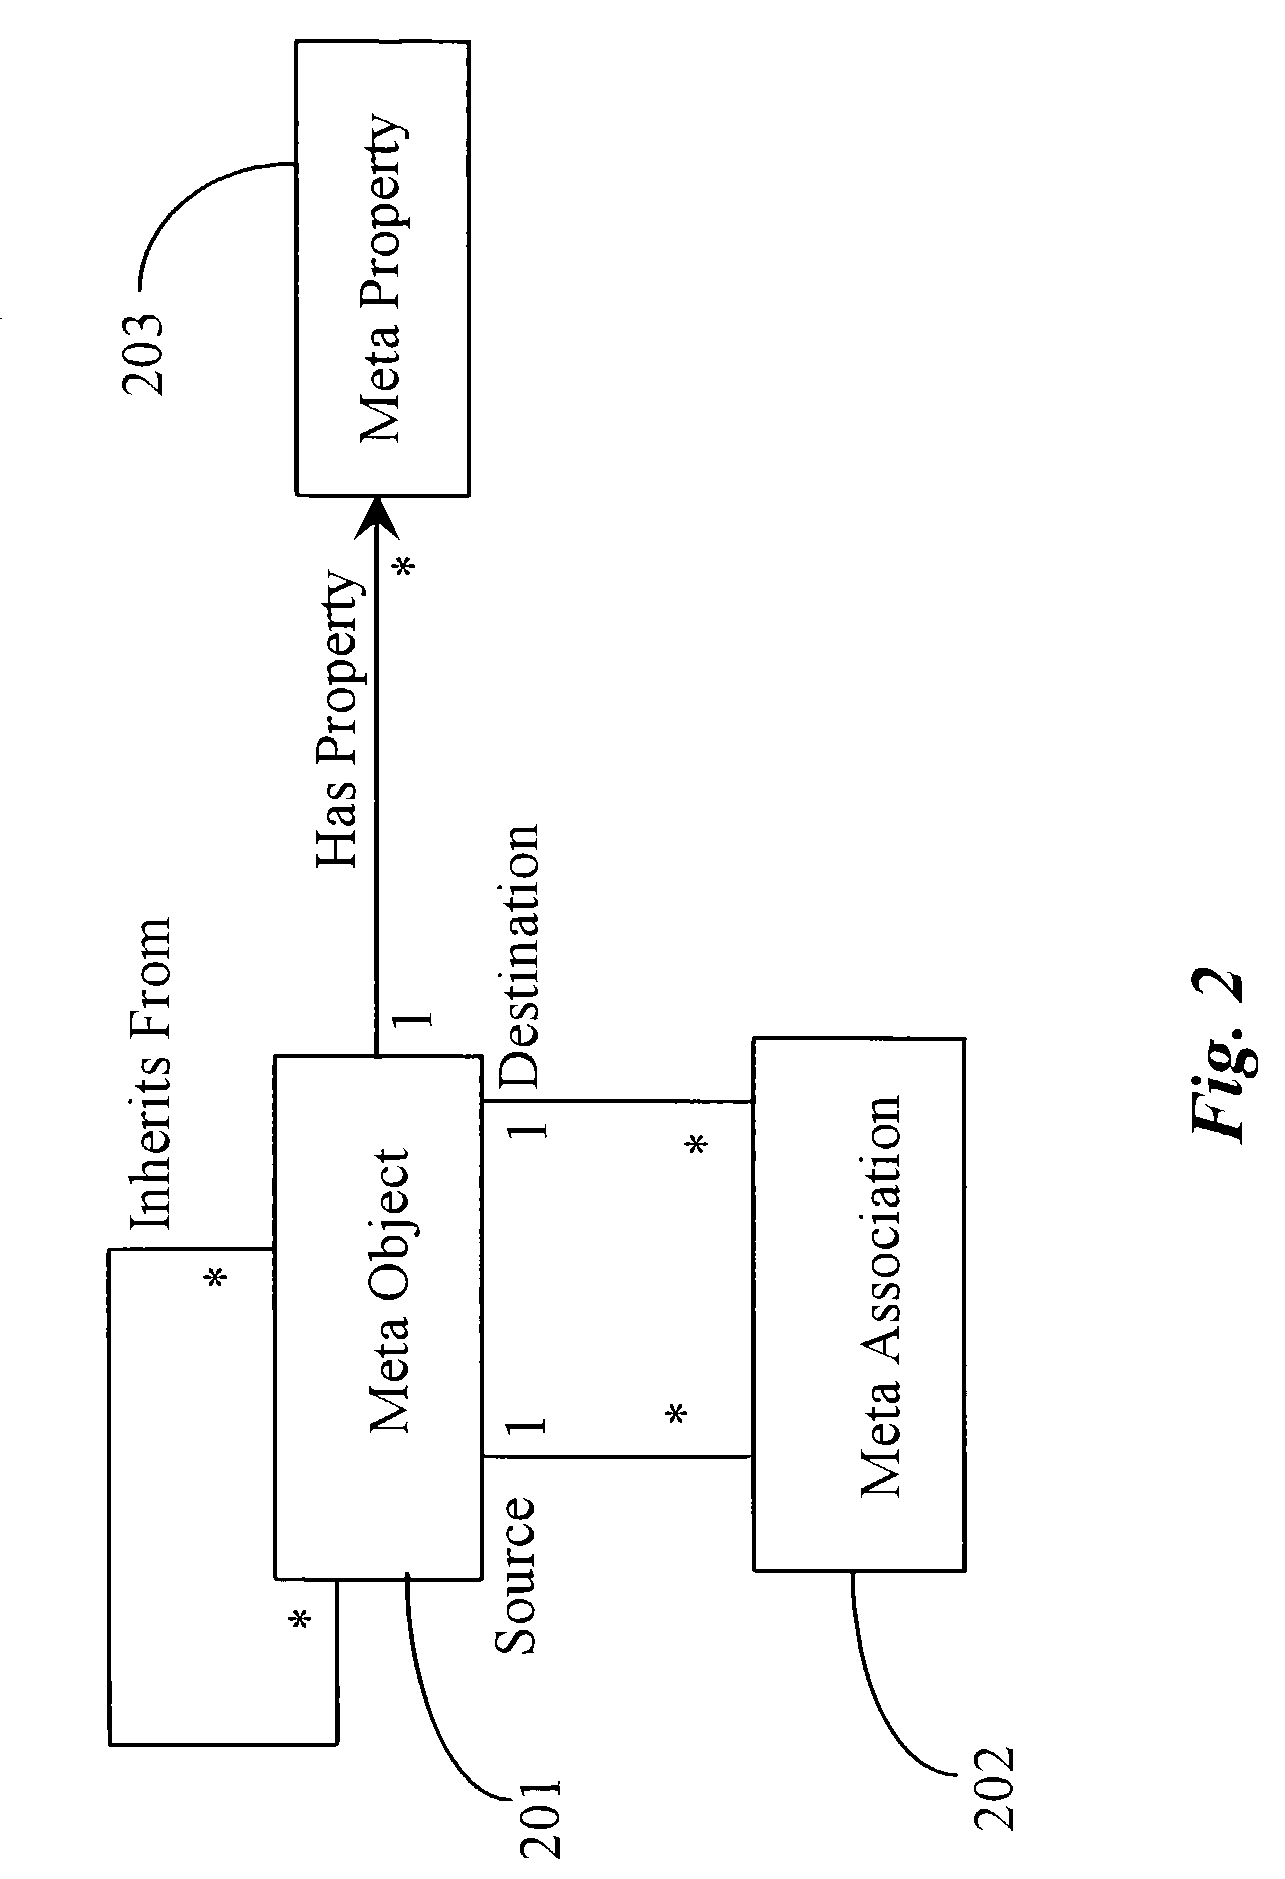 Method and apparatus for versioning and configuration management of object models